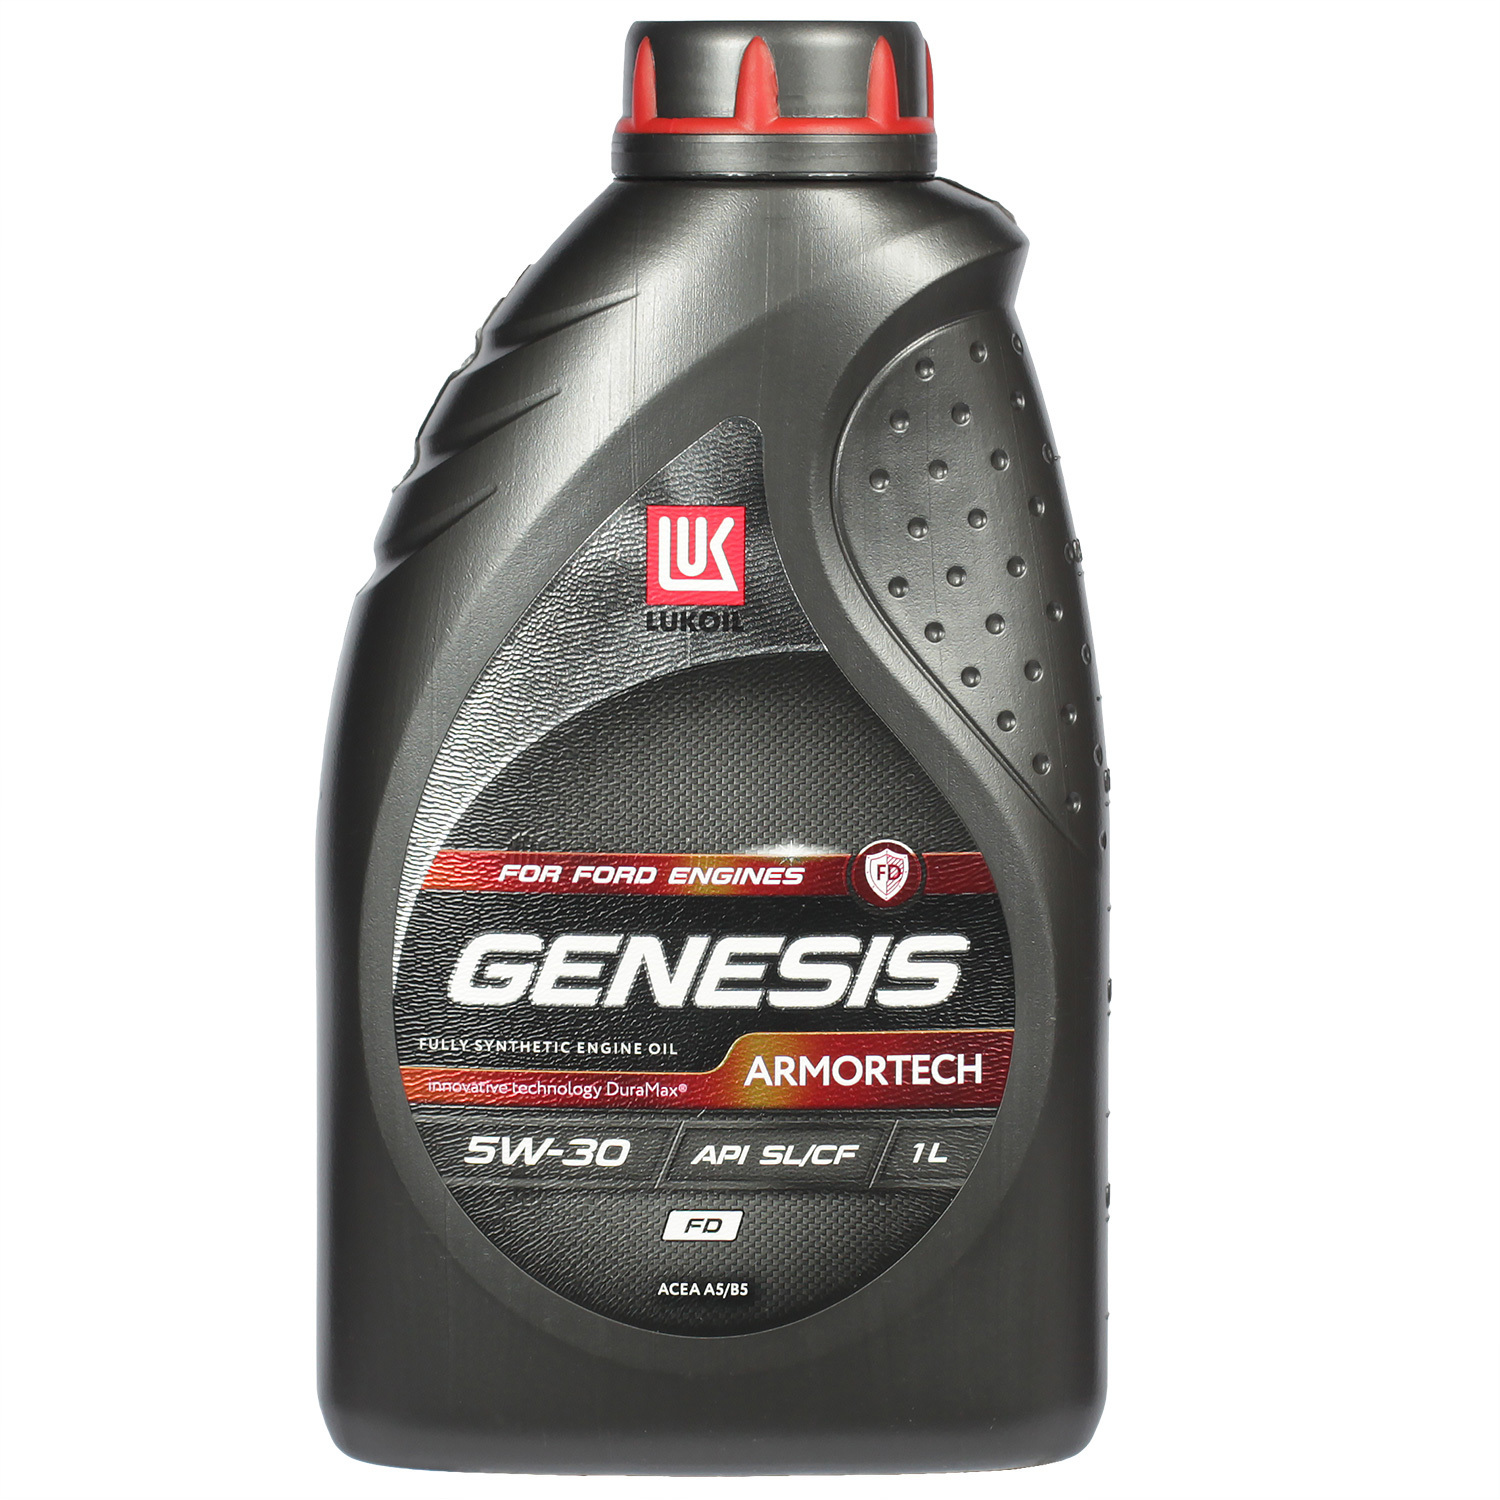 Lukoil Моторное масло Lukoil Genesis Armortech FD 5W-30, 1 л lukoil моторное масло lukoil genesis special vn 5w 30 57 л